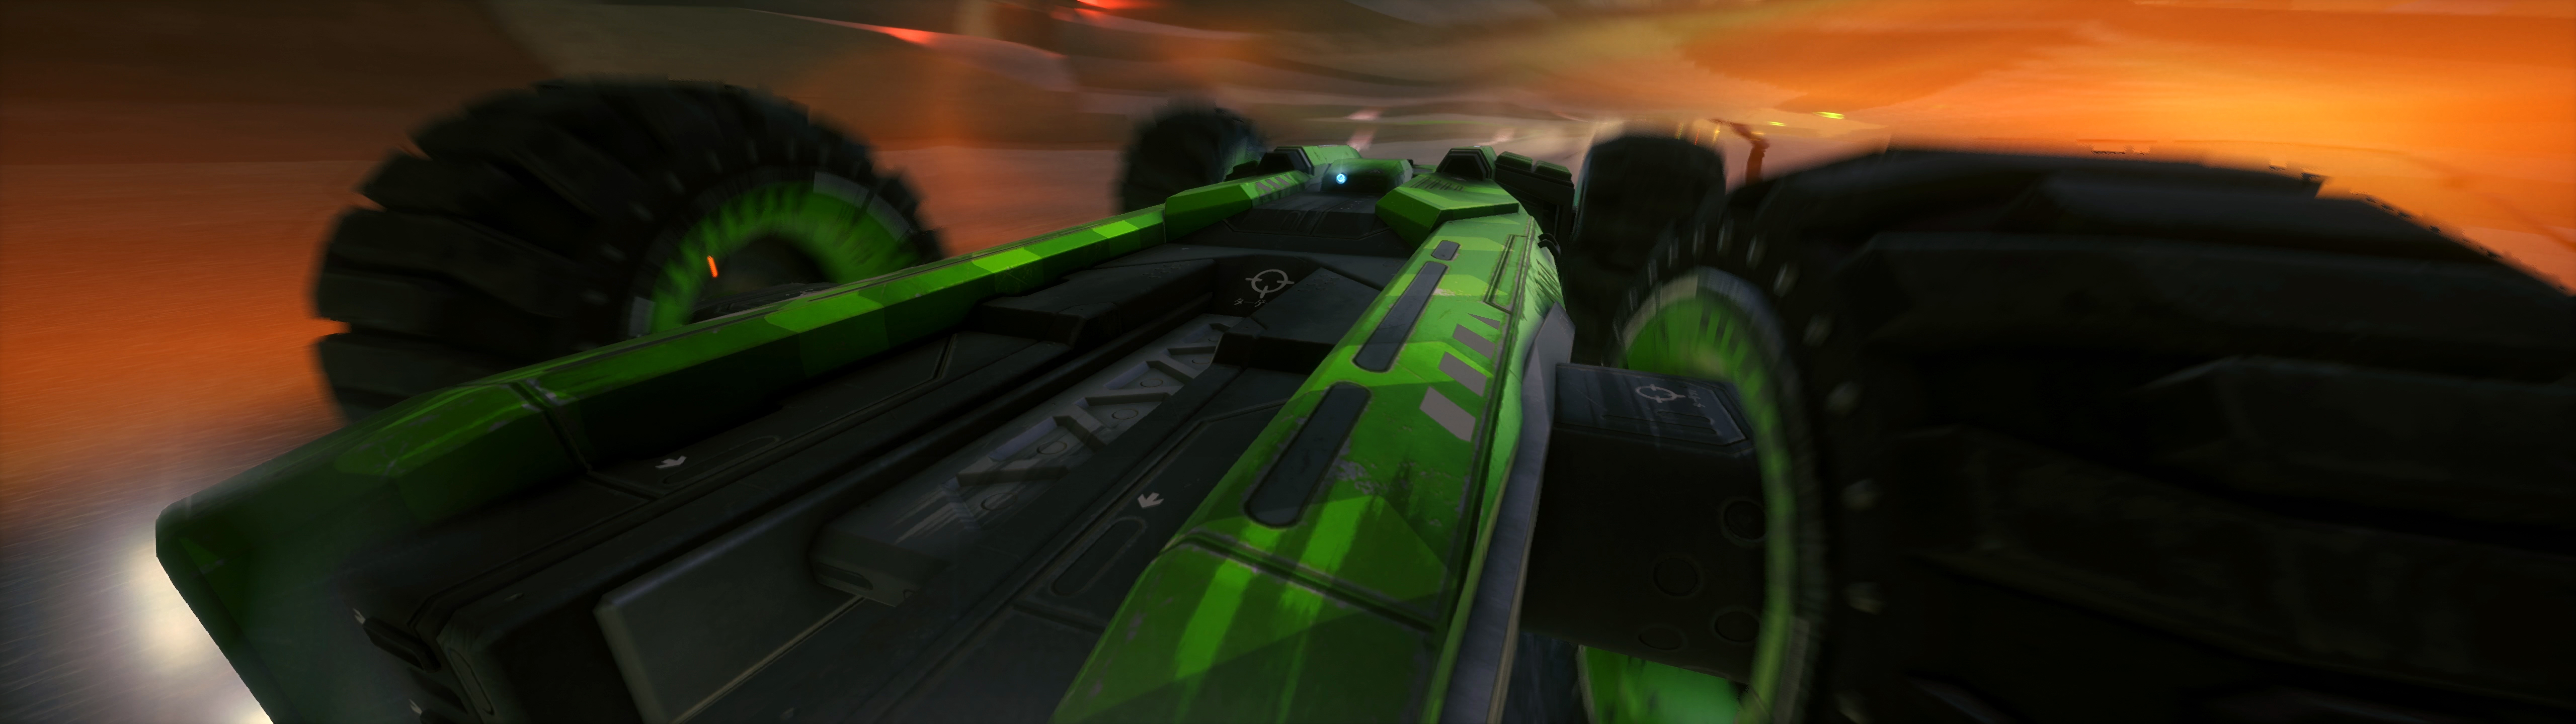 GRIP Panorama screenshot (Caged Element Inc./Wired Productions)